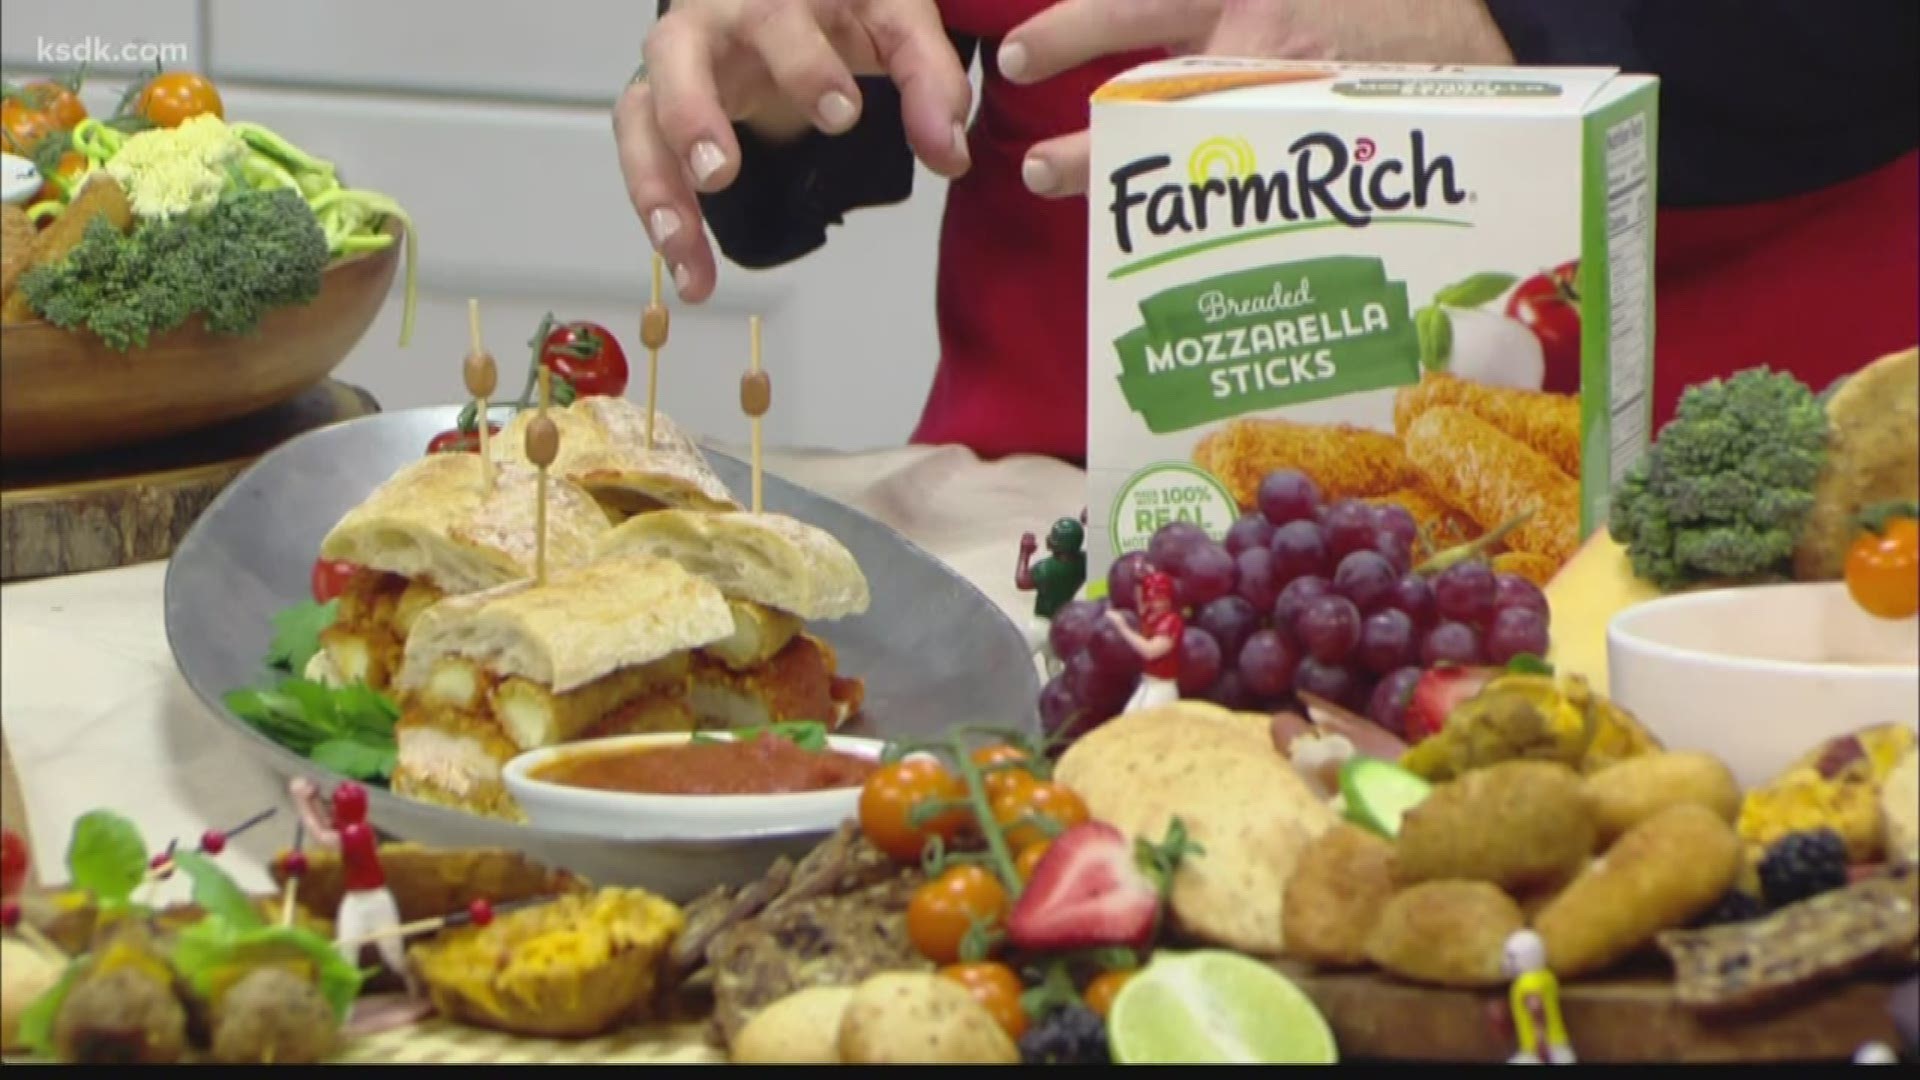 FarmRich has everything you need for the big game from dips to drinks and more!